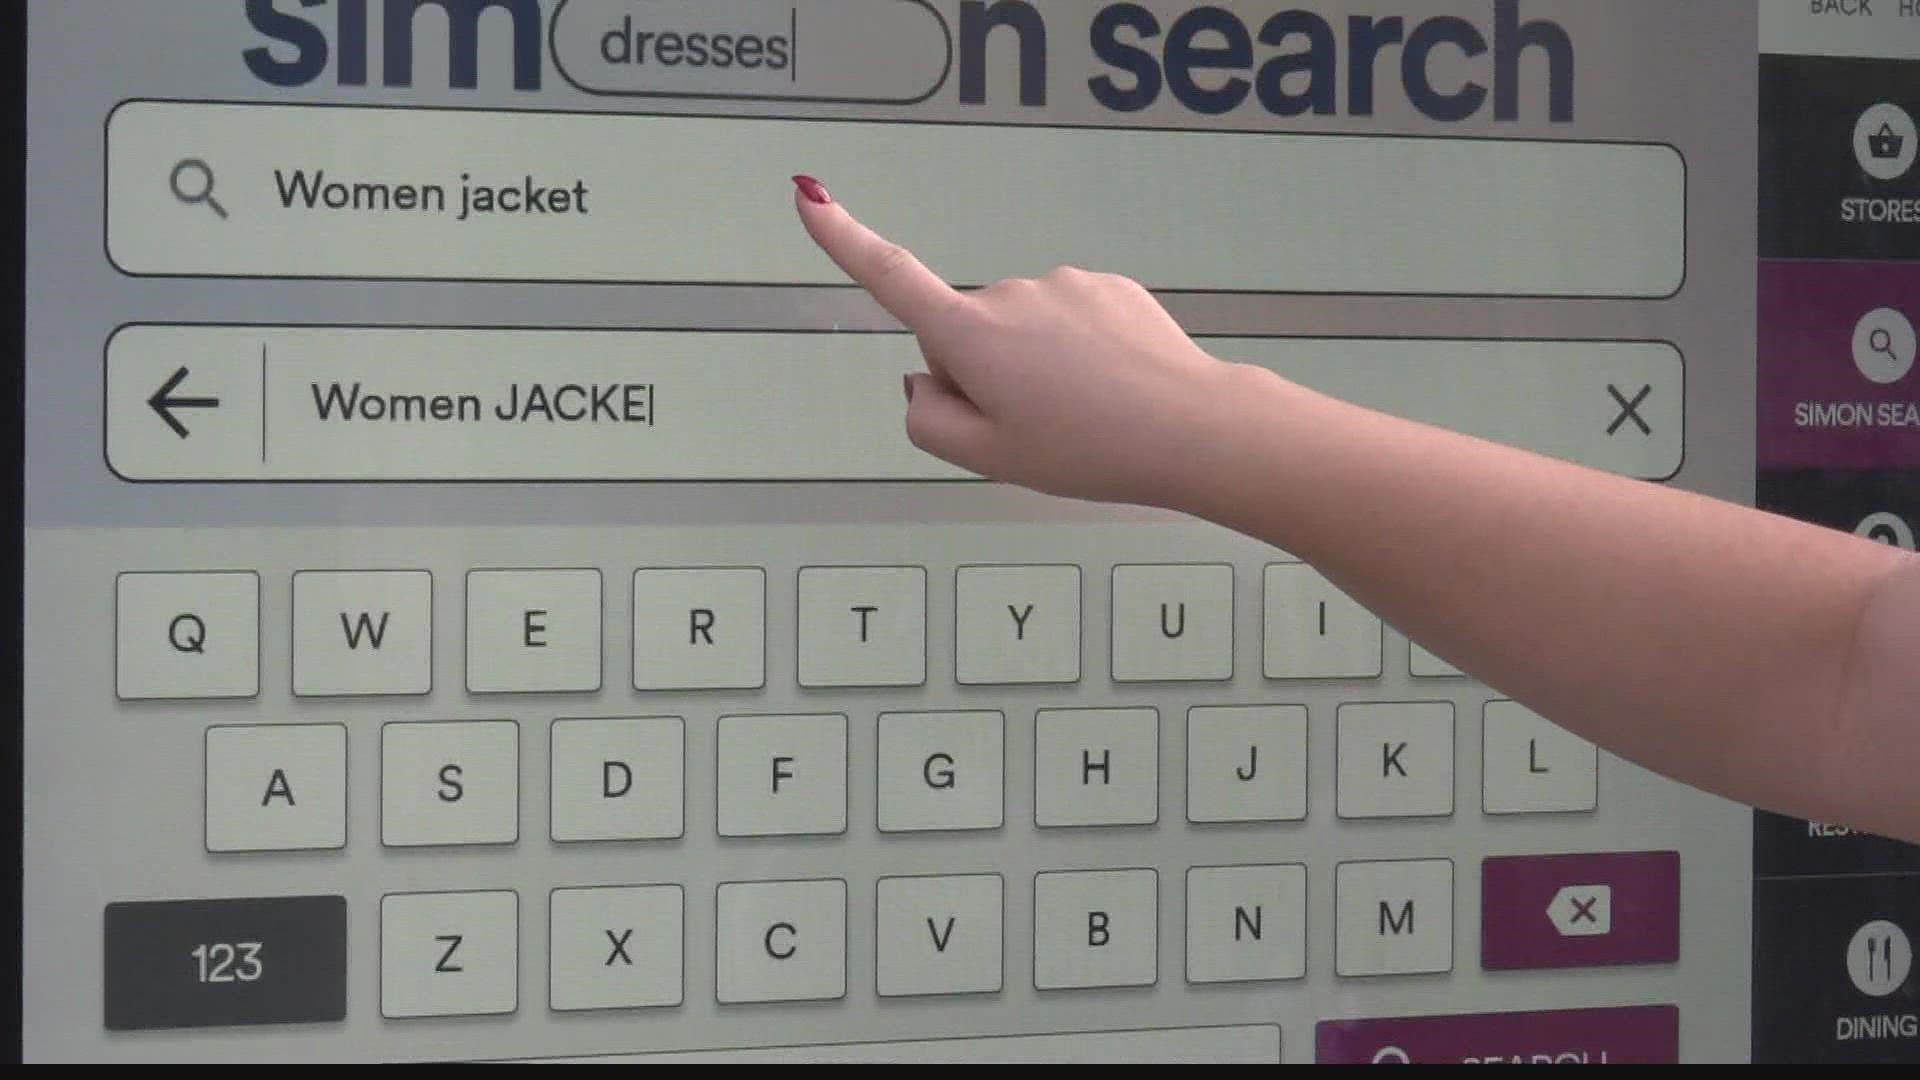 Simon Search allows shoppers to browse inventory before heading to the mall.